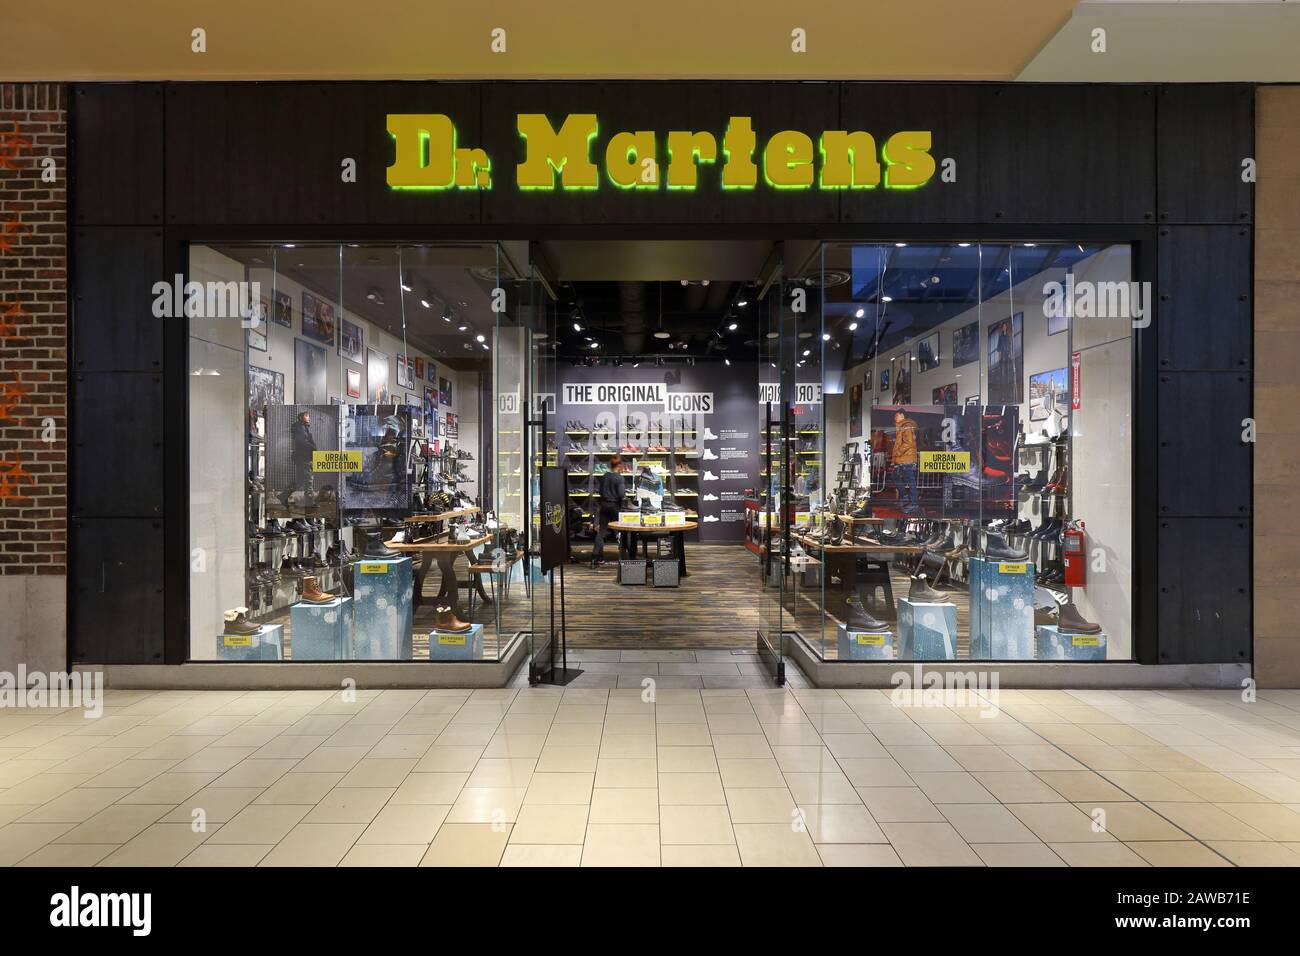 A Dr. Martens shoe shop in a shopping mall in New York, NY. Stock Photo